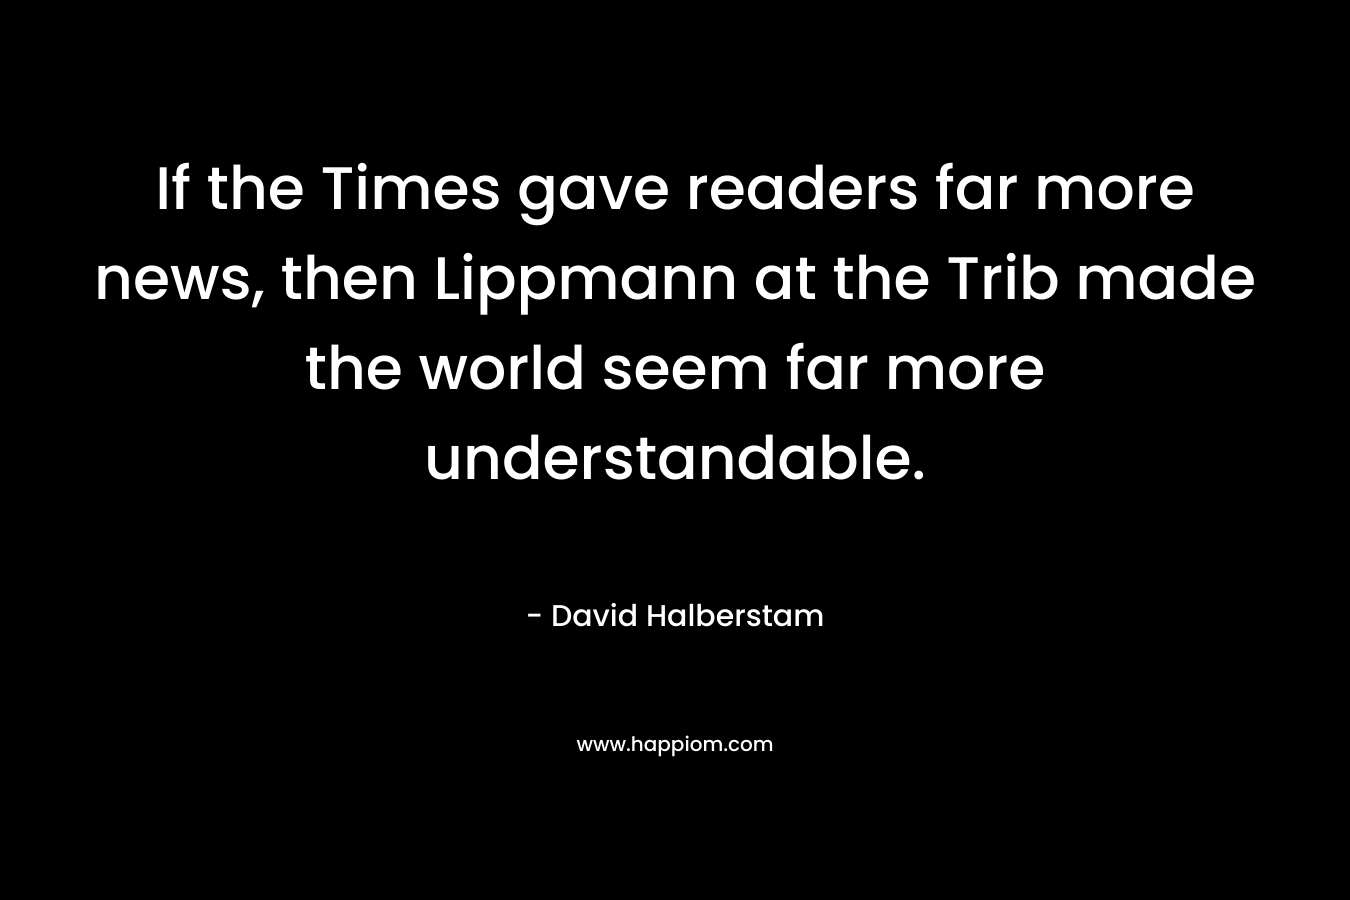 If the Times gave readers far more news, then Lippmann at the Trib made the world seem far more understandable. – David Halberstam